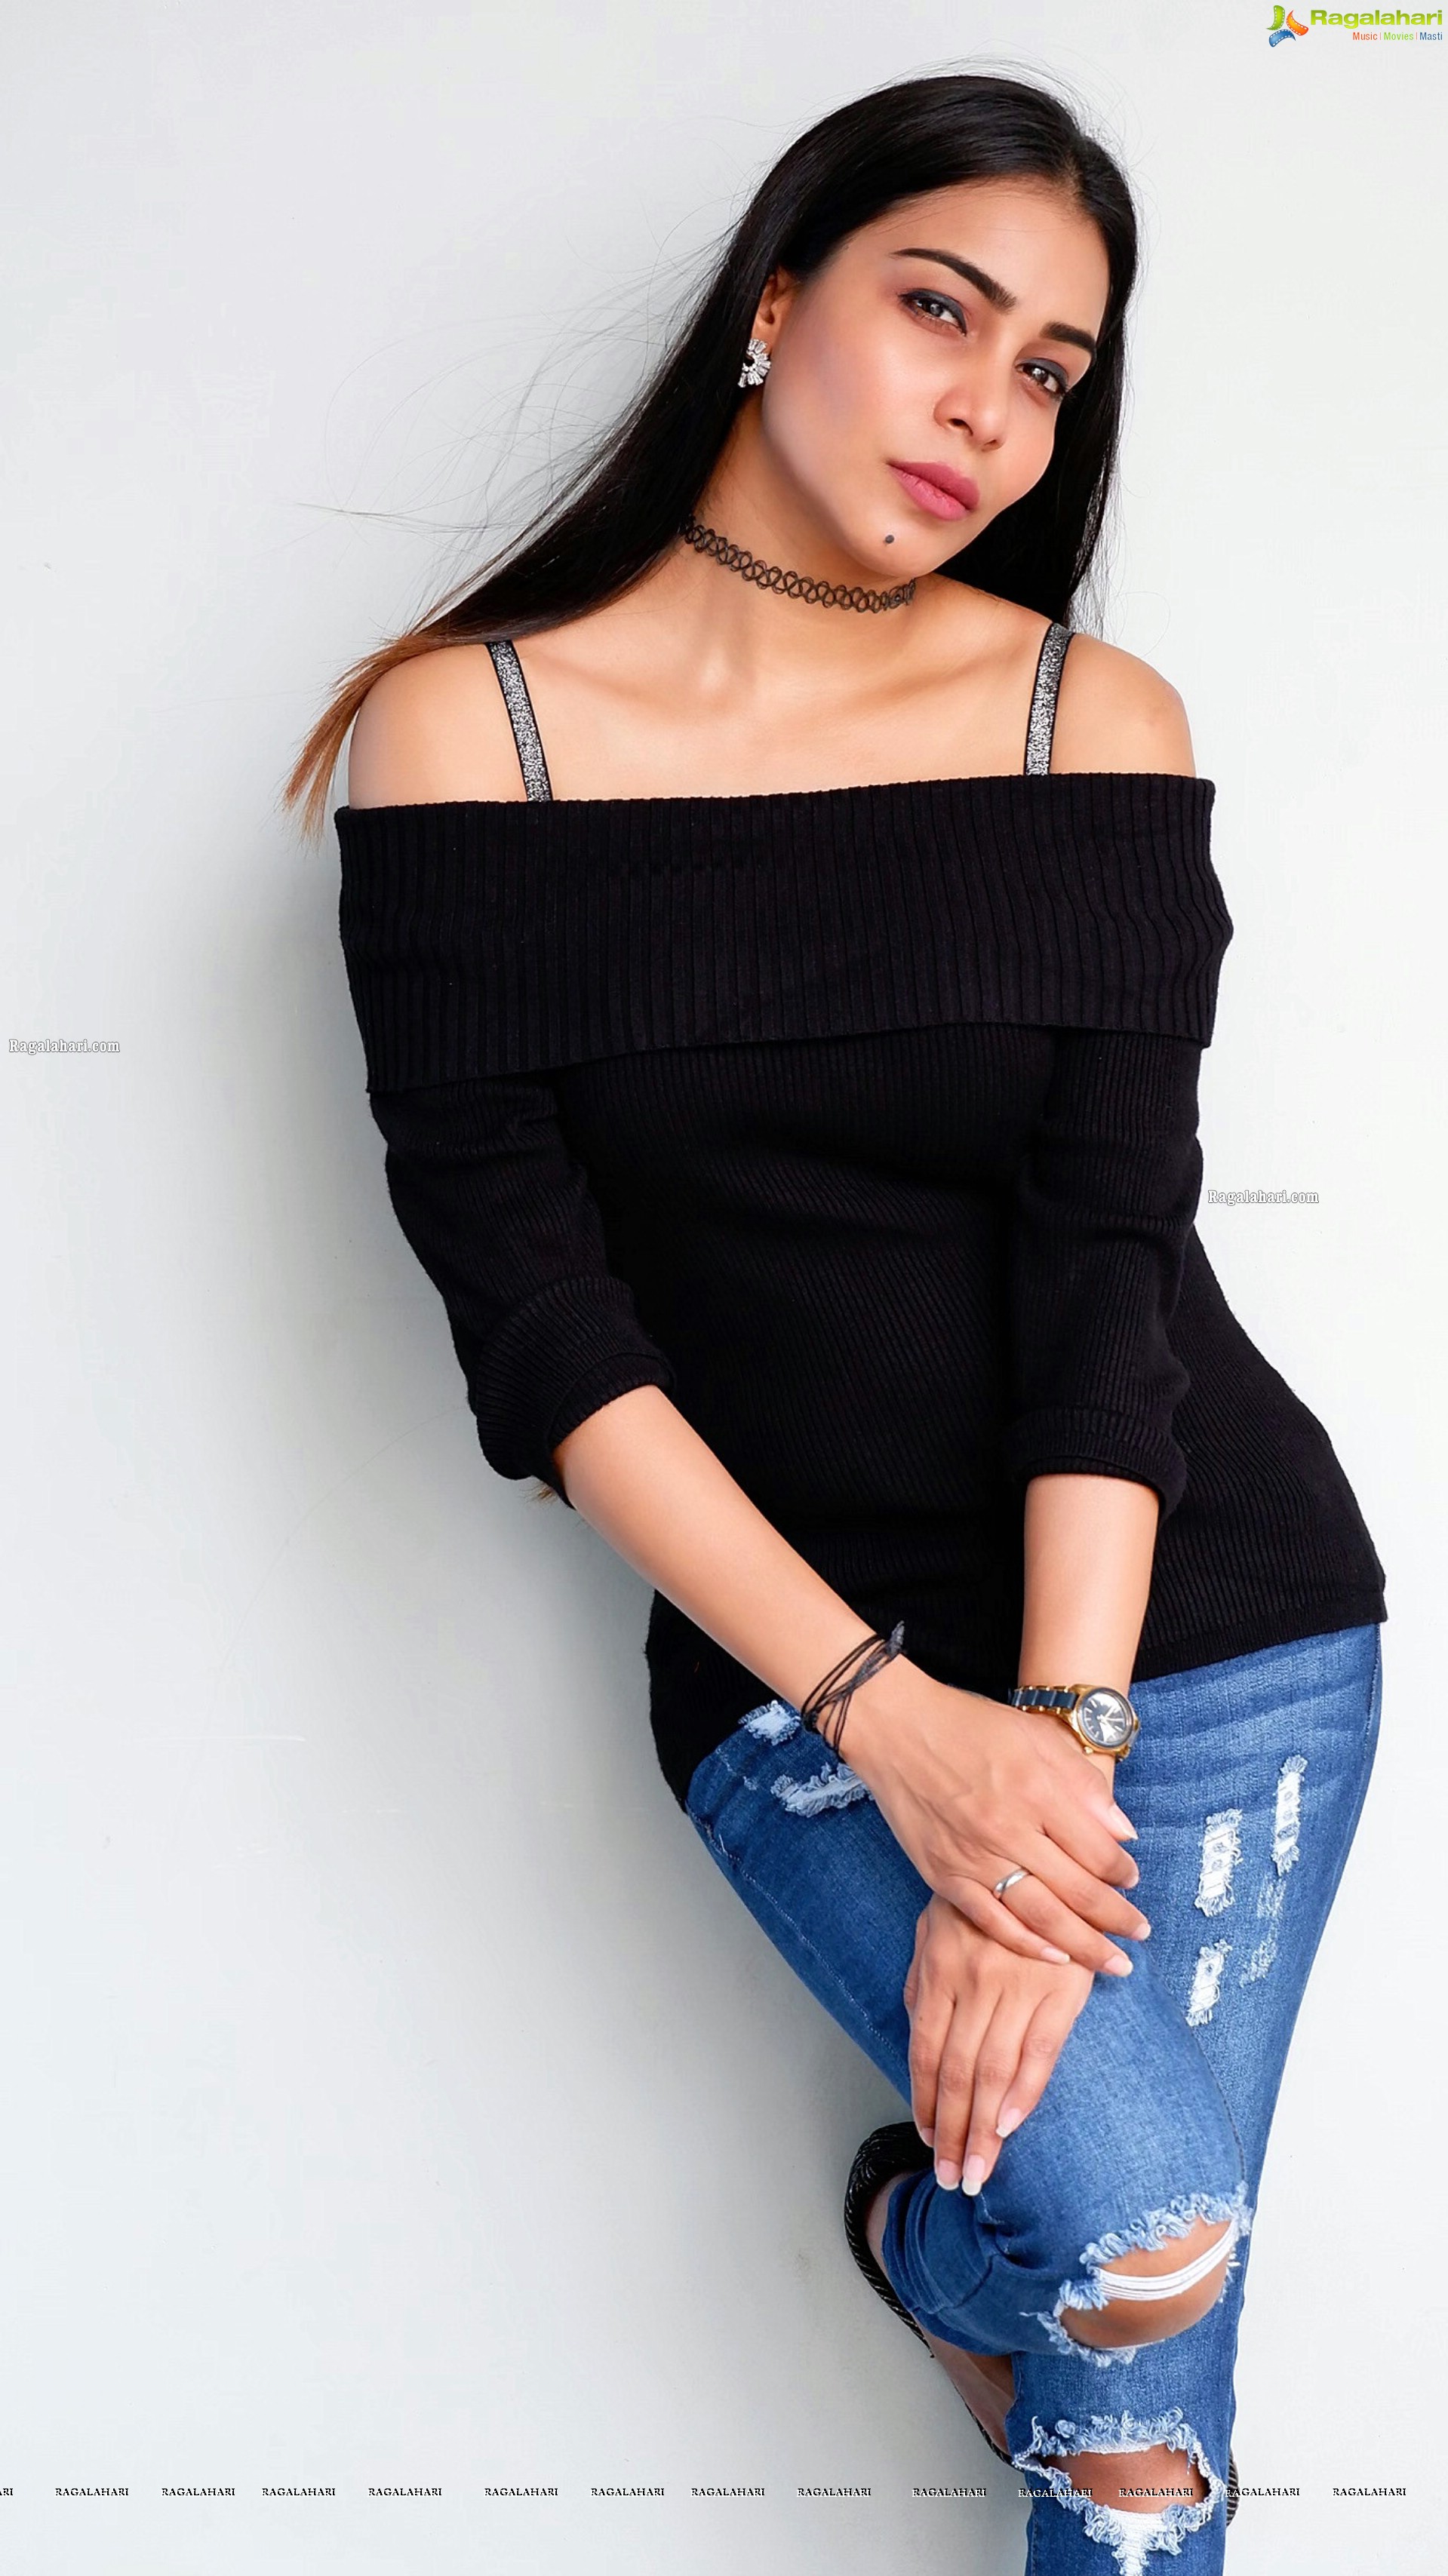 Sanjana Anne in Black Top and Jeans, HD Photo Gallery